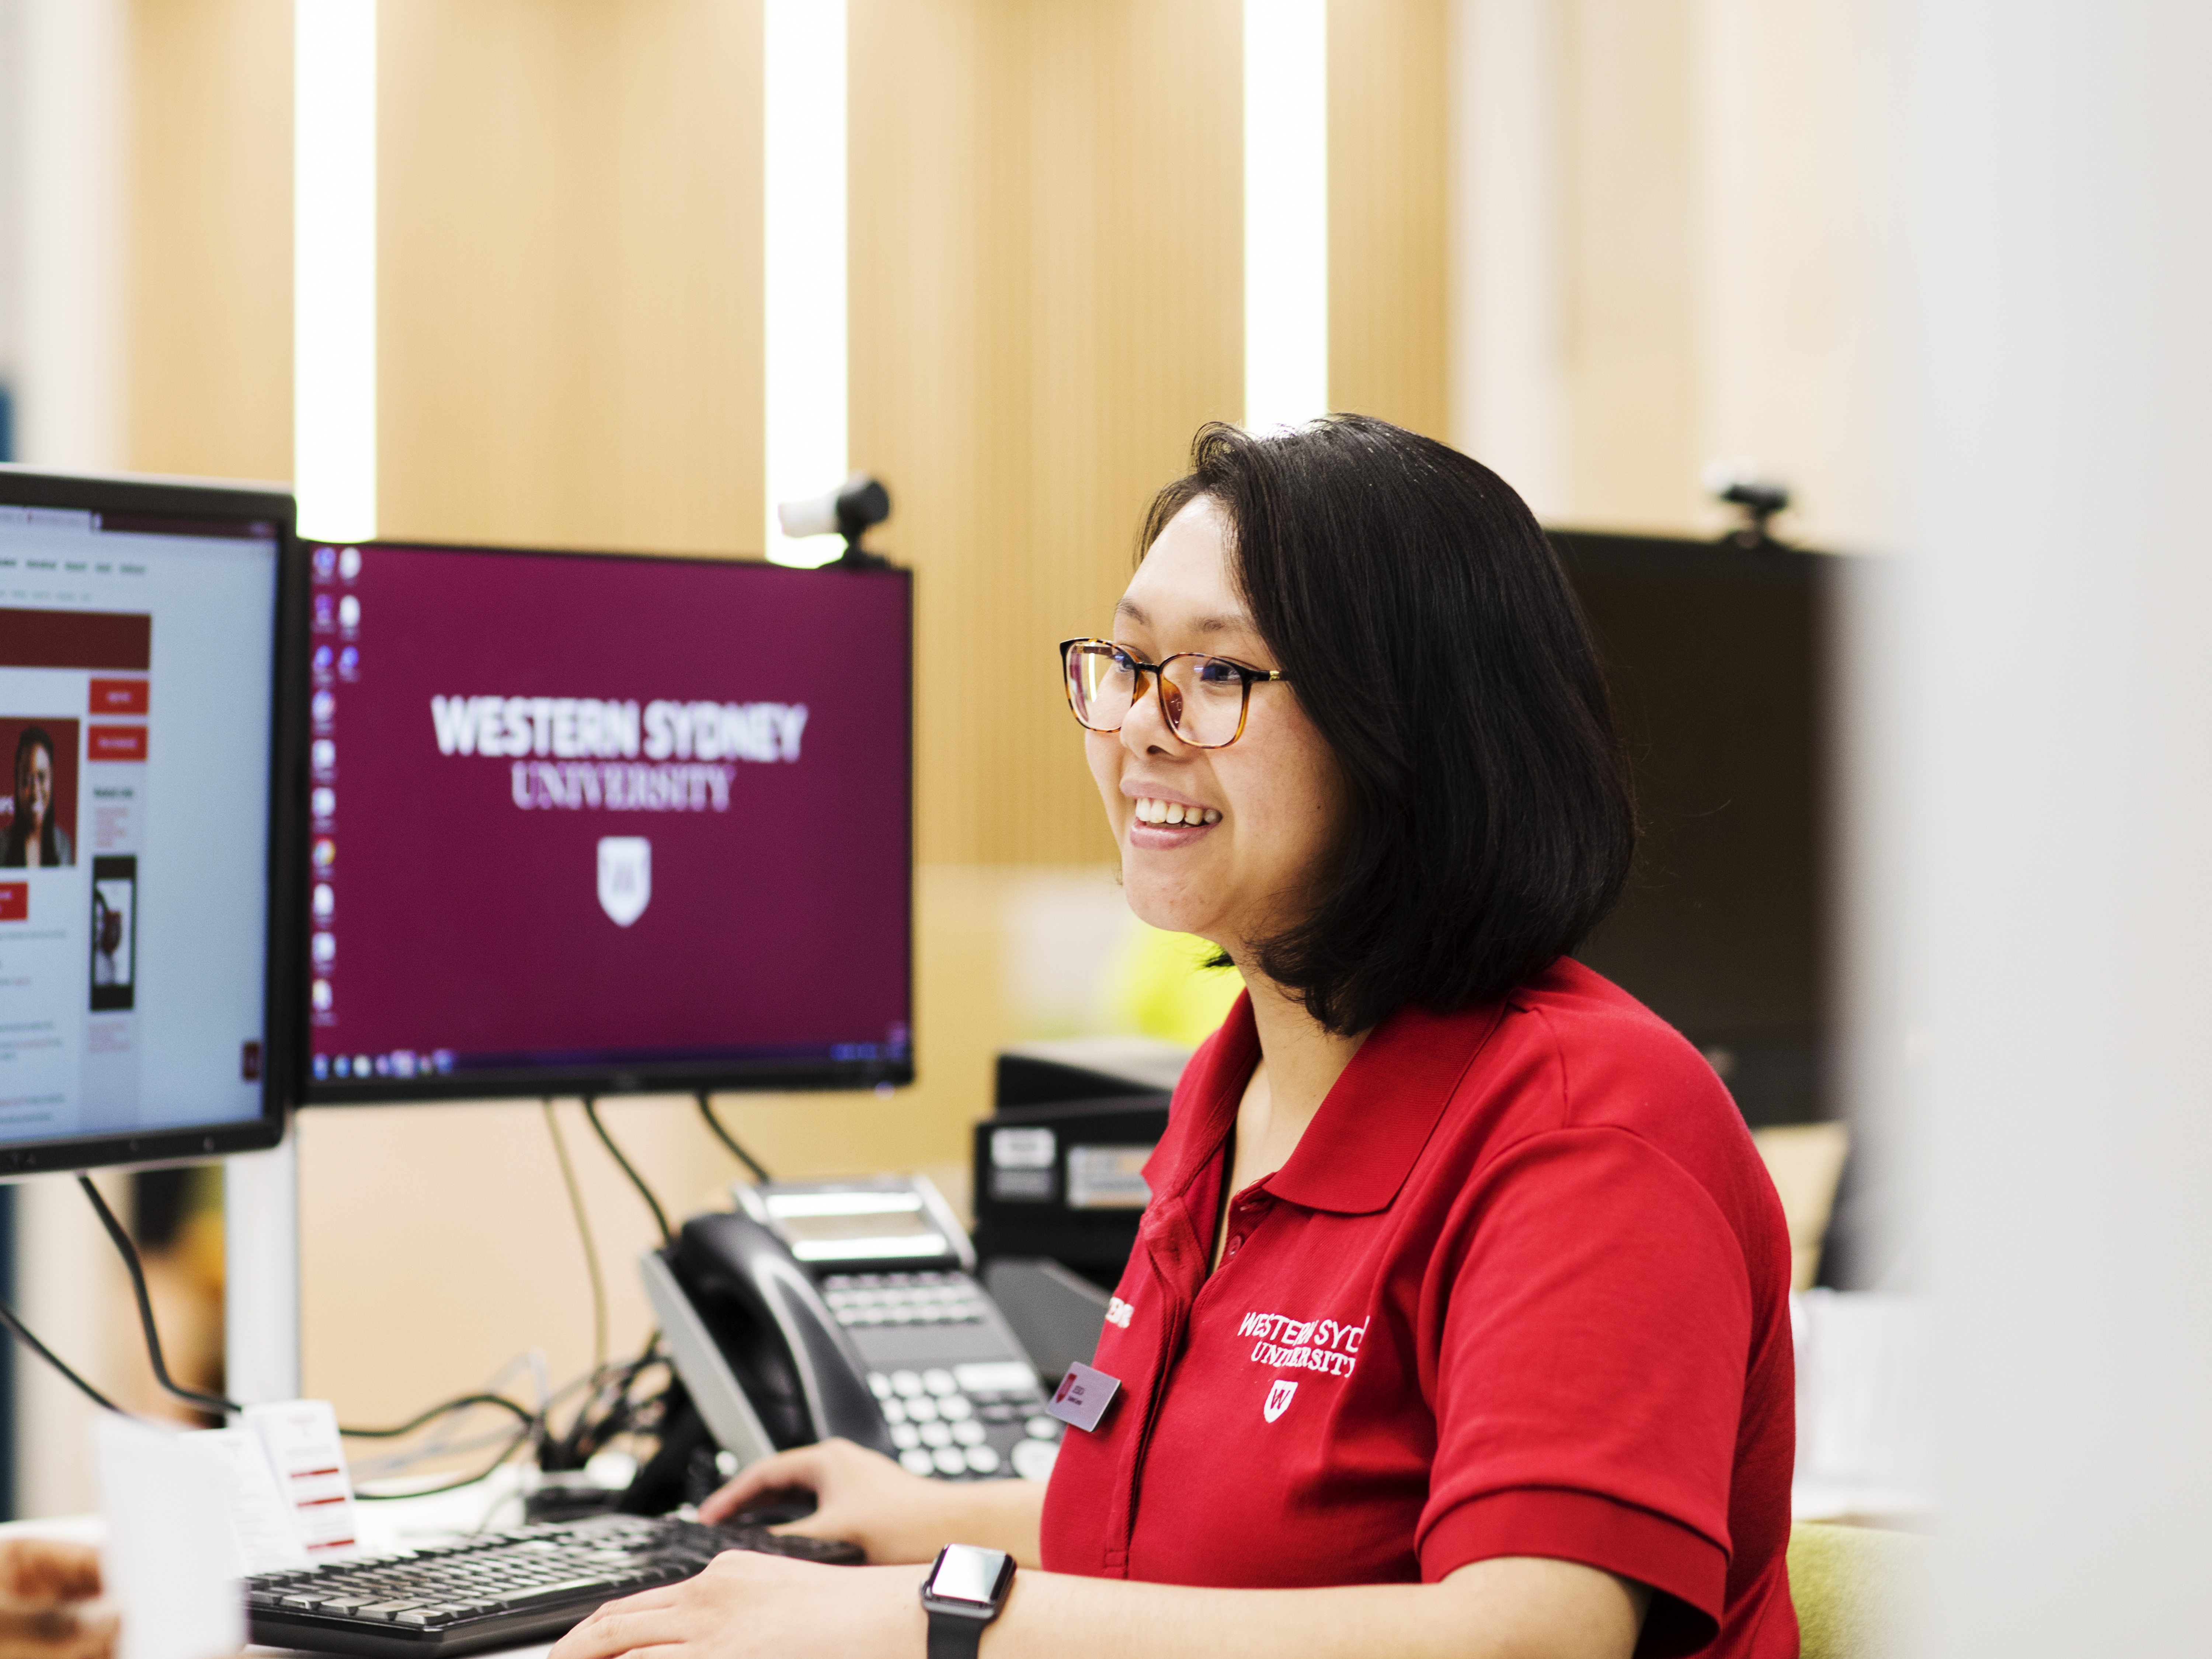 photo of person with fair skin and dark hair , wearing spectacles and a red shirt with a Western logo visible, sitting in front of a computer